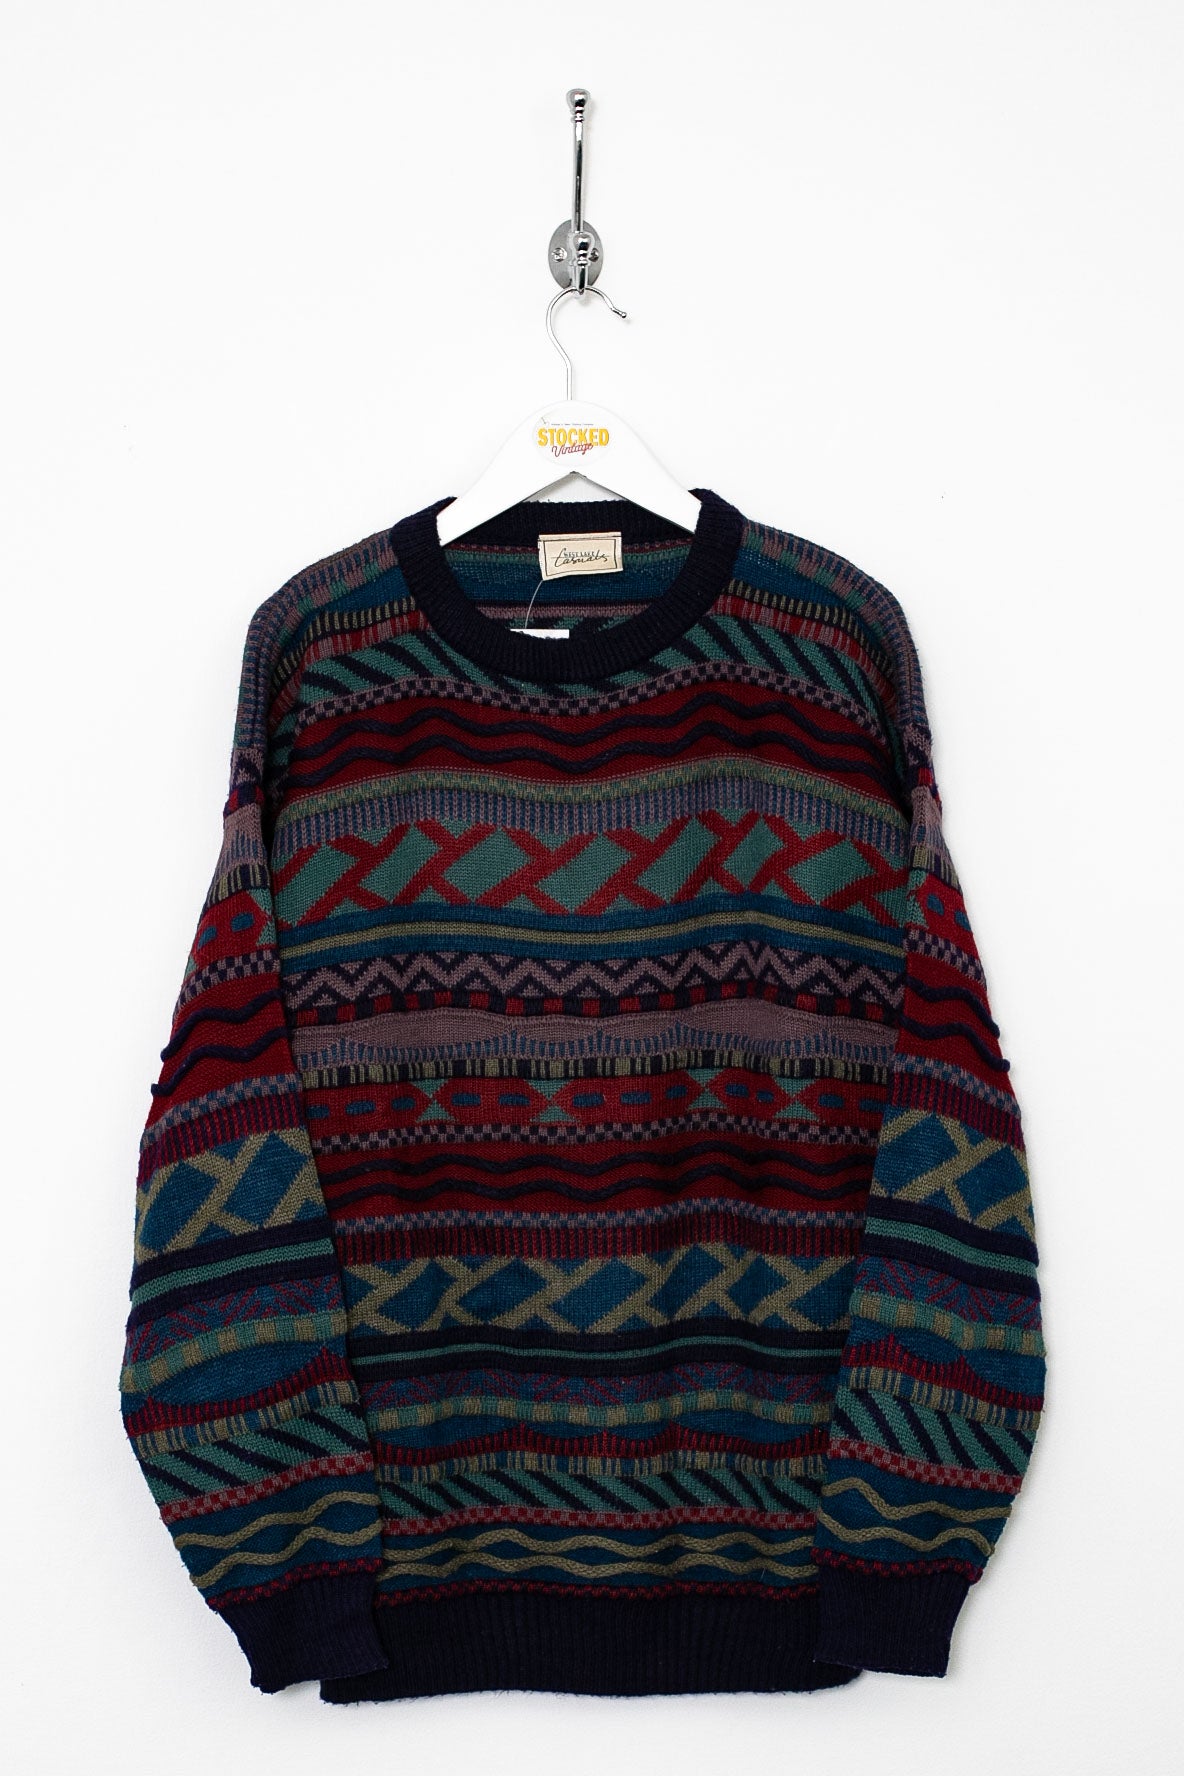 00s Coogi Style Knit Jumper (M)